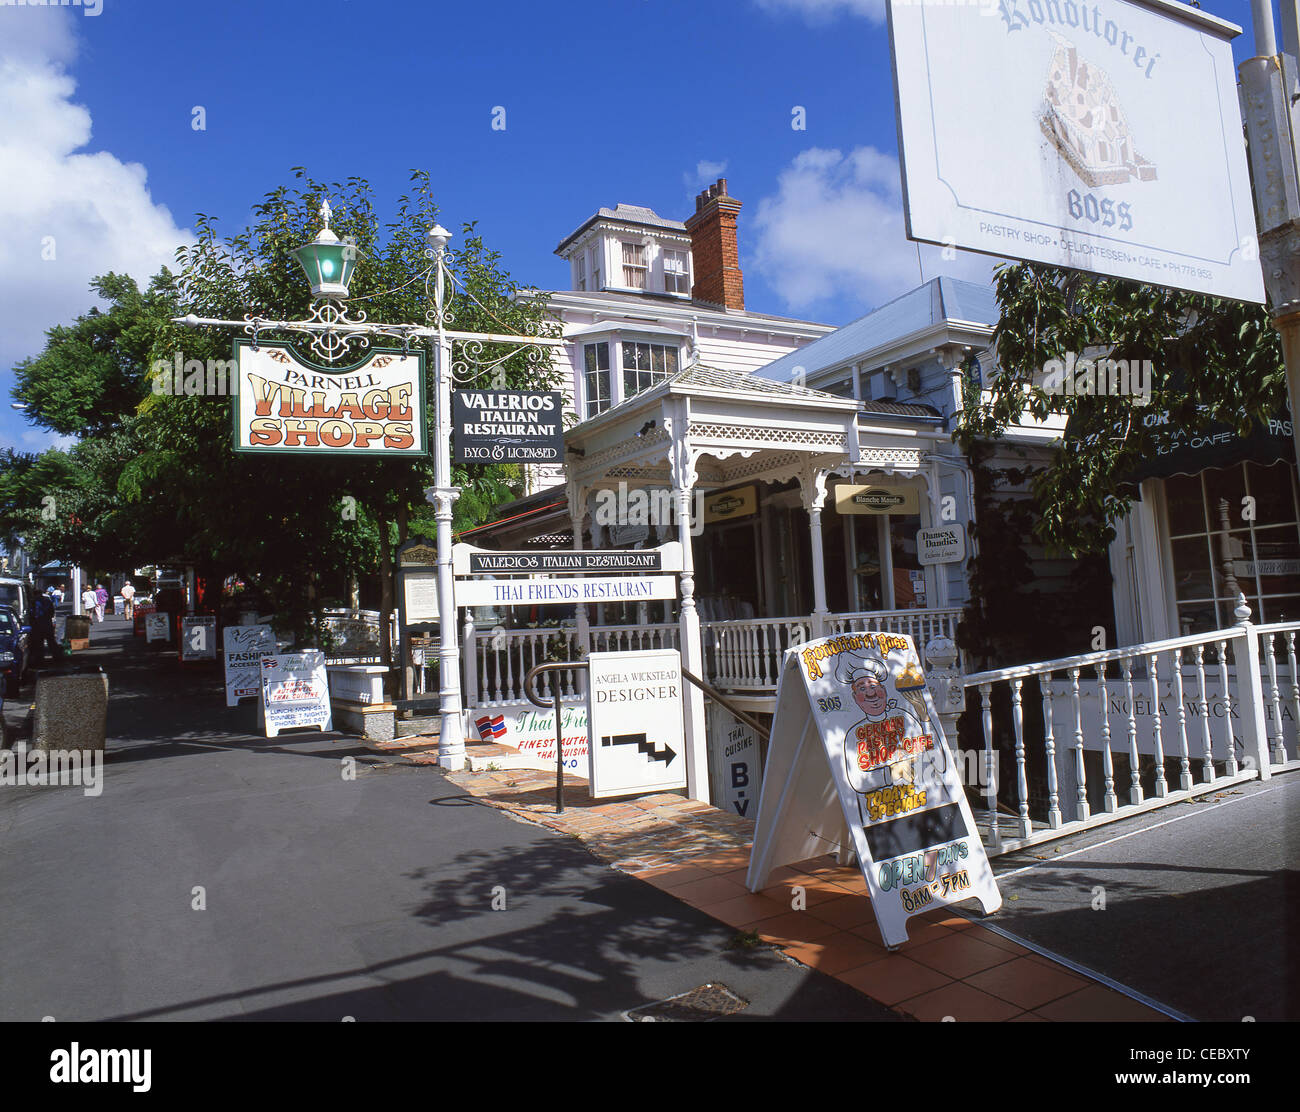 Parnell Village shops, Parnell Rise, Parnell, Auckland, Auckland Region, North Island, New Zealand Stock Photo